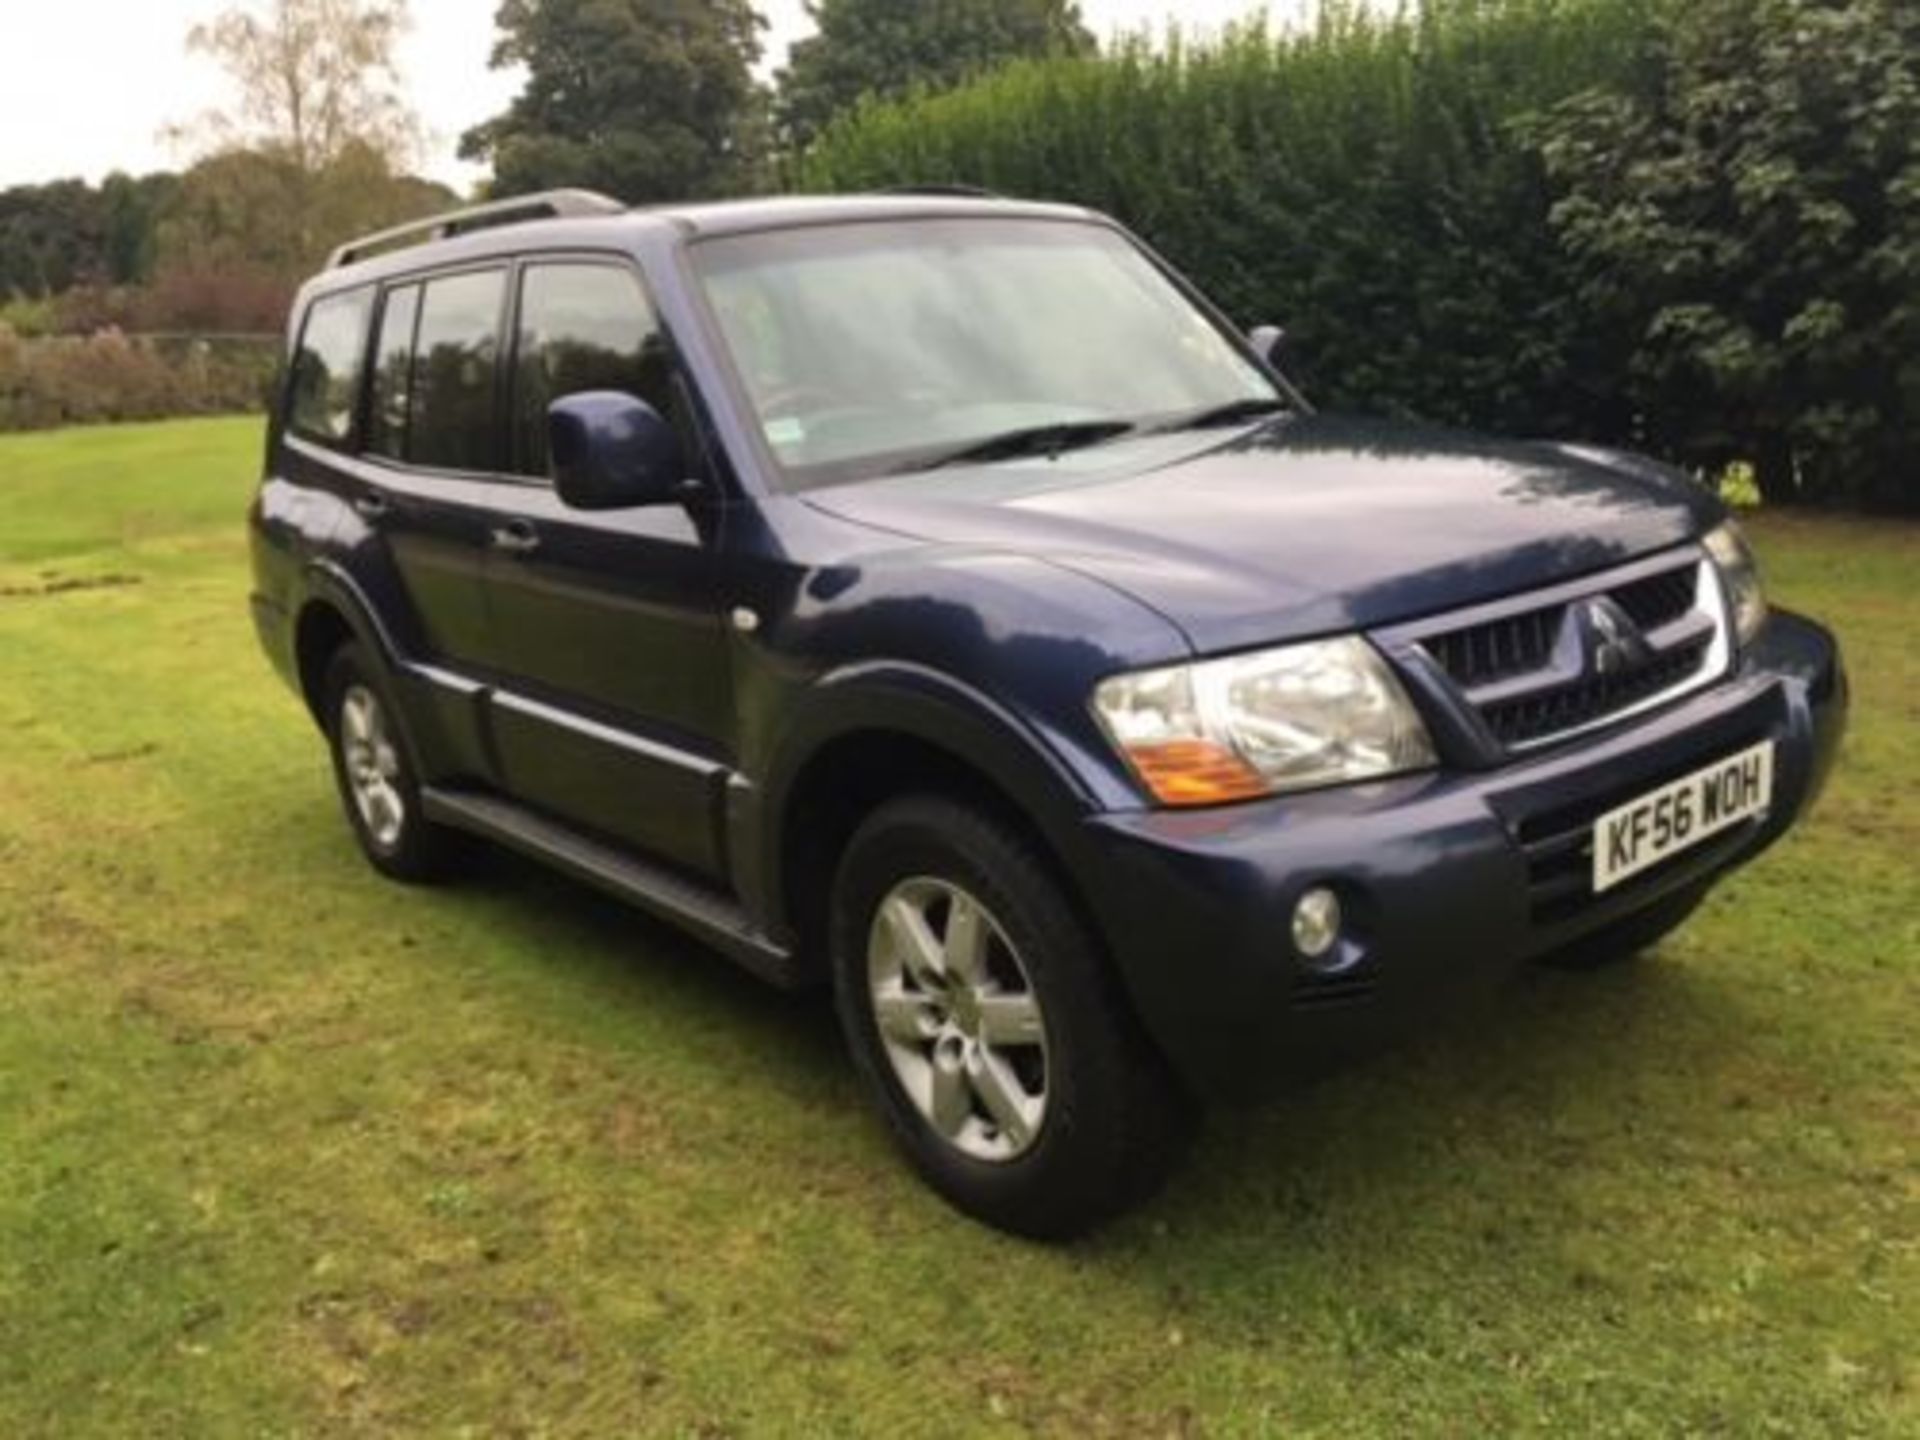 2006/06 MITSUBISHI SHOGUN 3.2 DID ELEGANCE, 7 SEATER, AUTOMATIC. ONLY 75K MILES, MOT AUGUST 2017